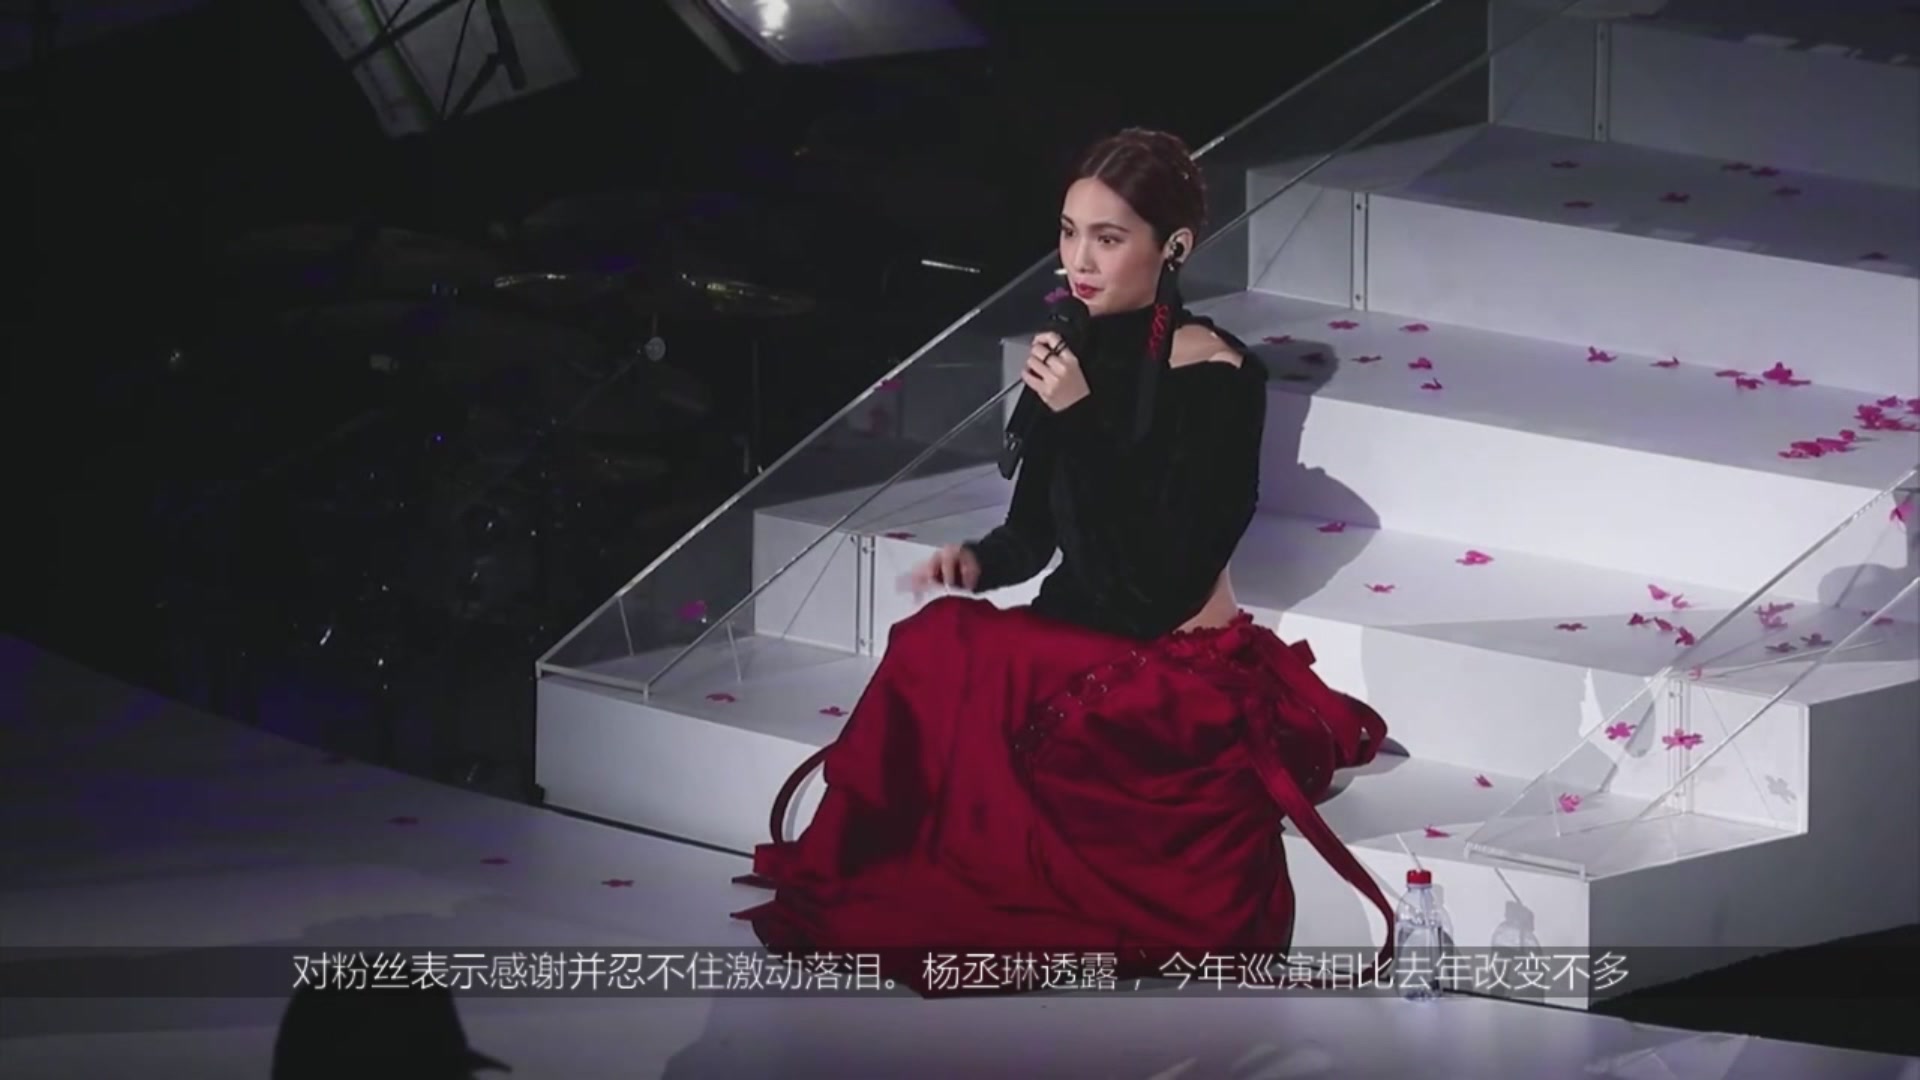 The 45-year-old Yang Pilin burst into tears when her fans shouted that she was not an old goddess.